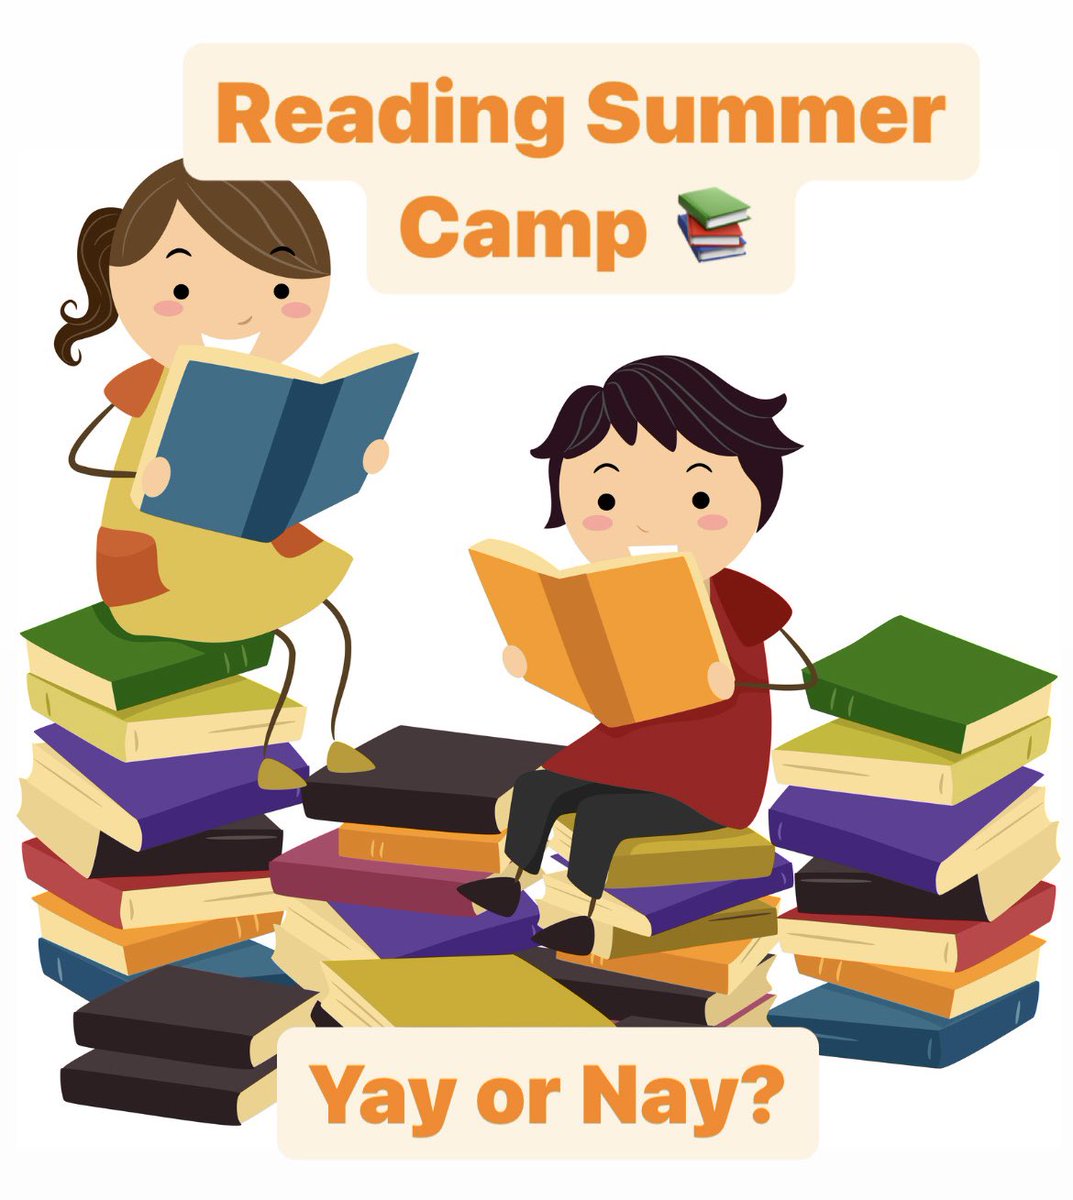 Who fancies a ‘Reading Summer Camp’? I’ll buy the books and post out prior to camp. Read daily for 90mins together: critique and discuss daily. I think it’d be great. #readingcamp #summercamp Yay or nay?